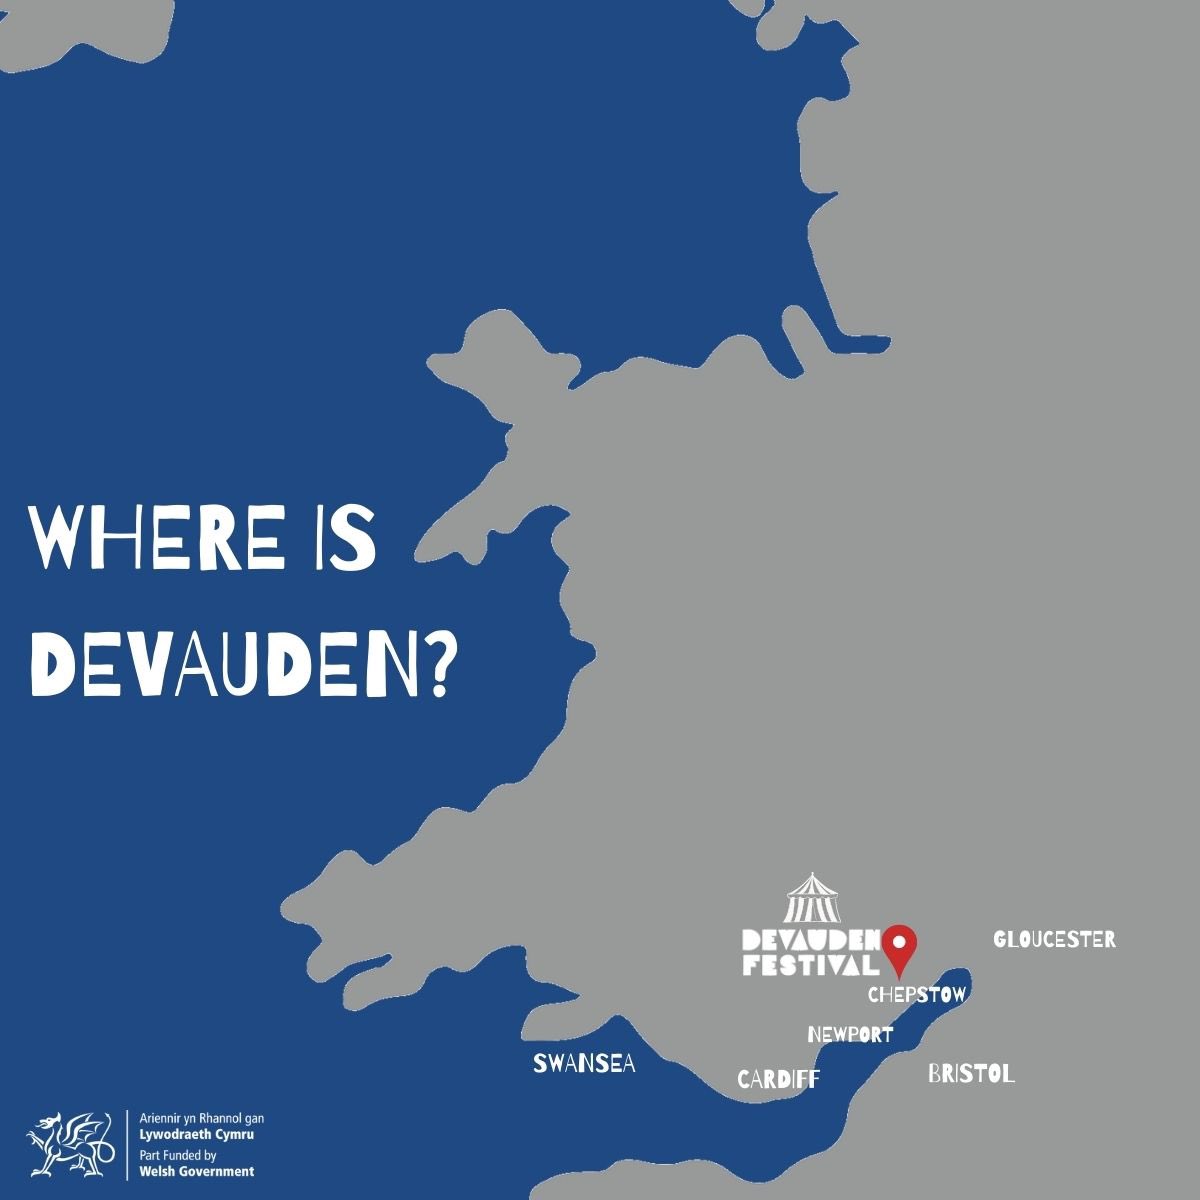 We’ve always been really proud to “put Devauden on the map”………🌎 Now in the interest of helping a few of you out, we have litterally put Devauden on the map 😂 🚙 10 minute drive north from the Chepstow Severn Bridge. ✌🏻